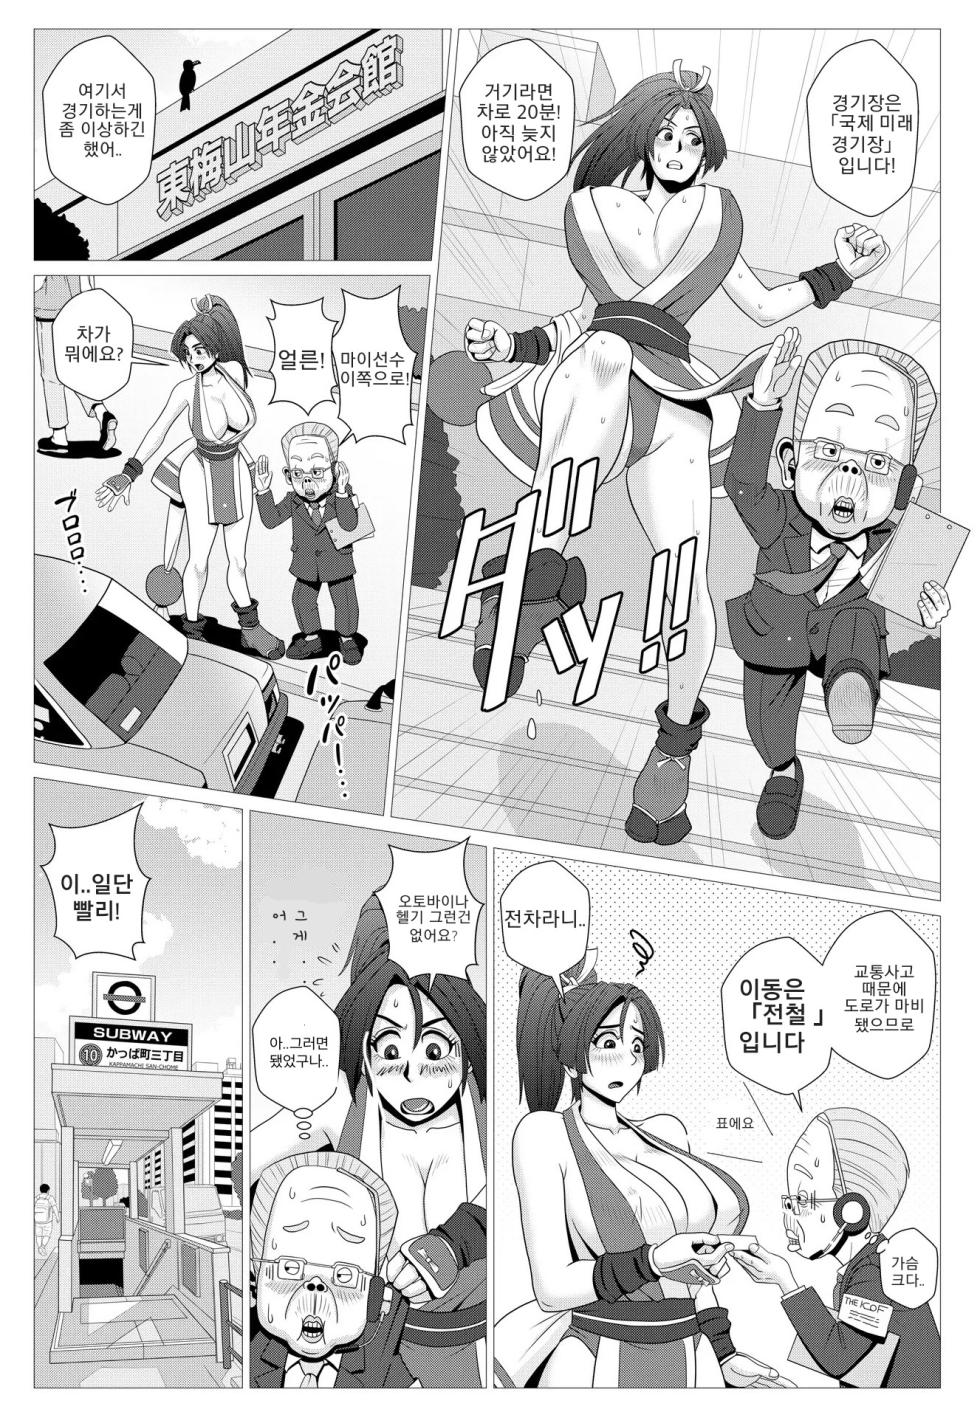 [Falcon115 (Forester)] Maidono no San (The King of Fighters) [Korean] - Page 4